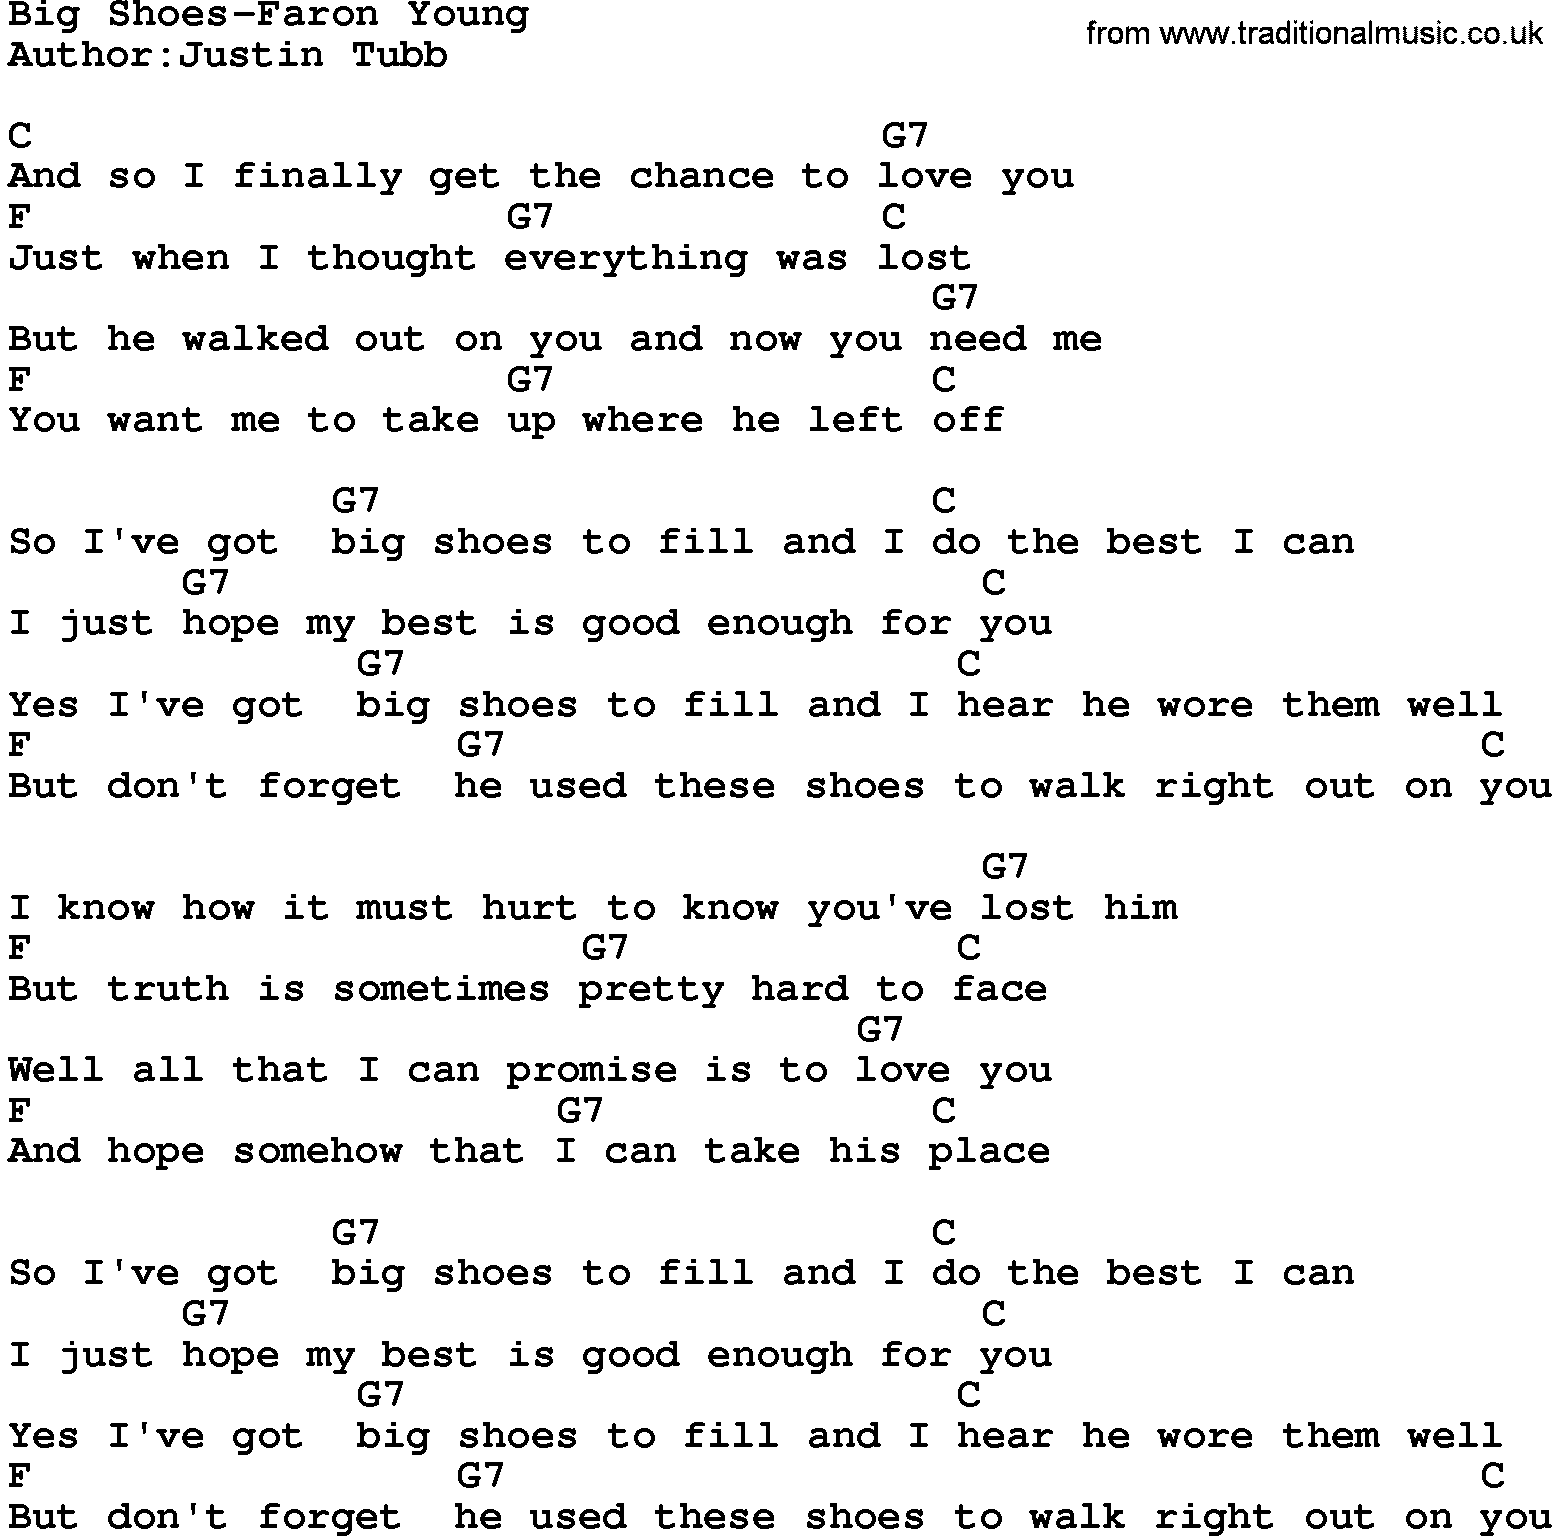 Country music song: Big Shoes-Faron Young lyrics and chords